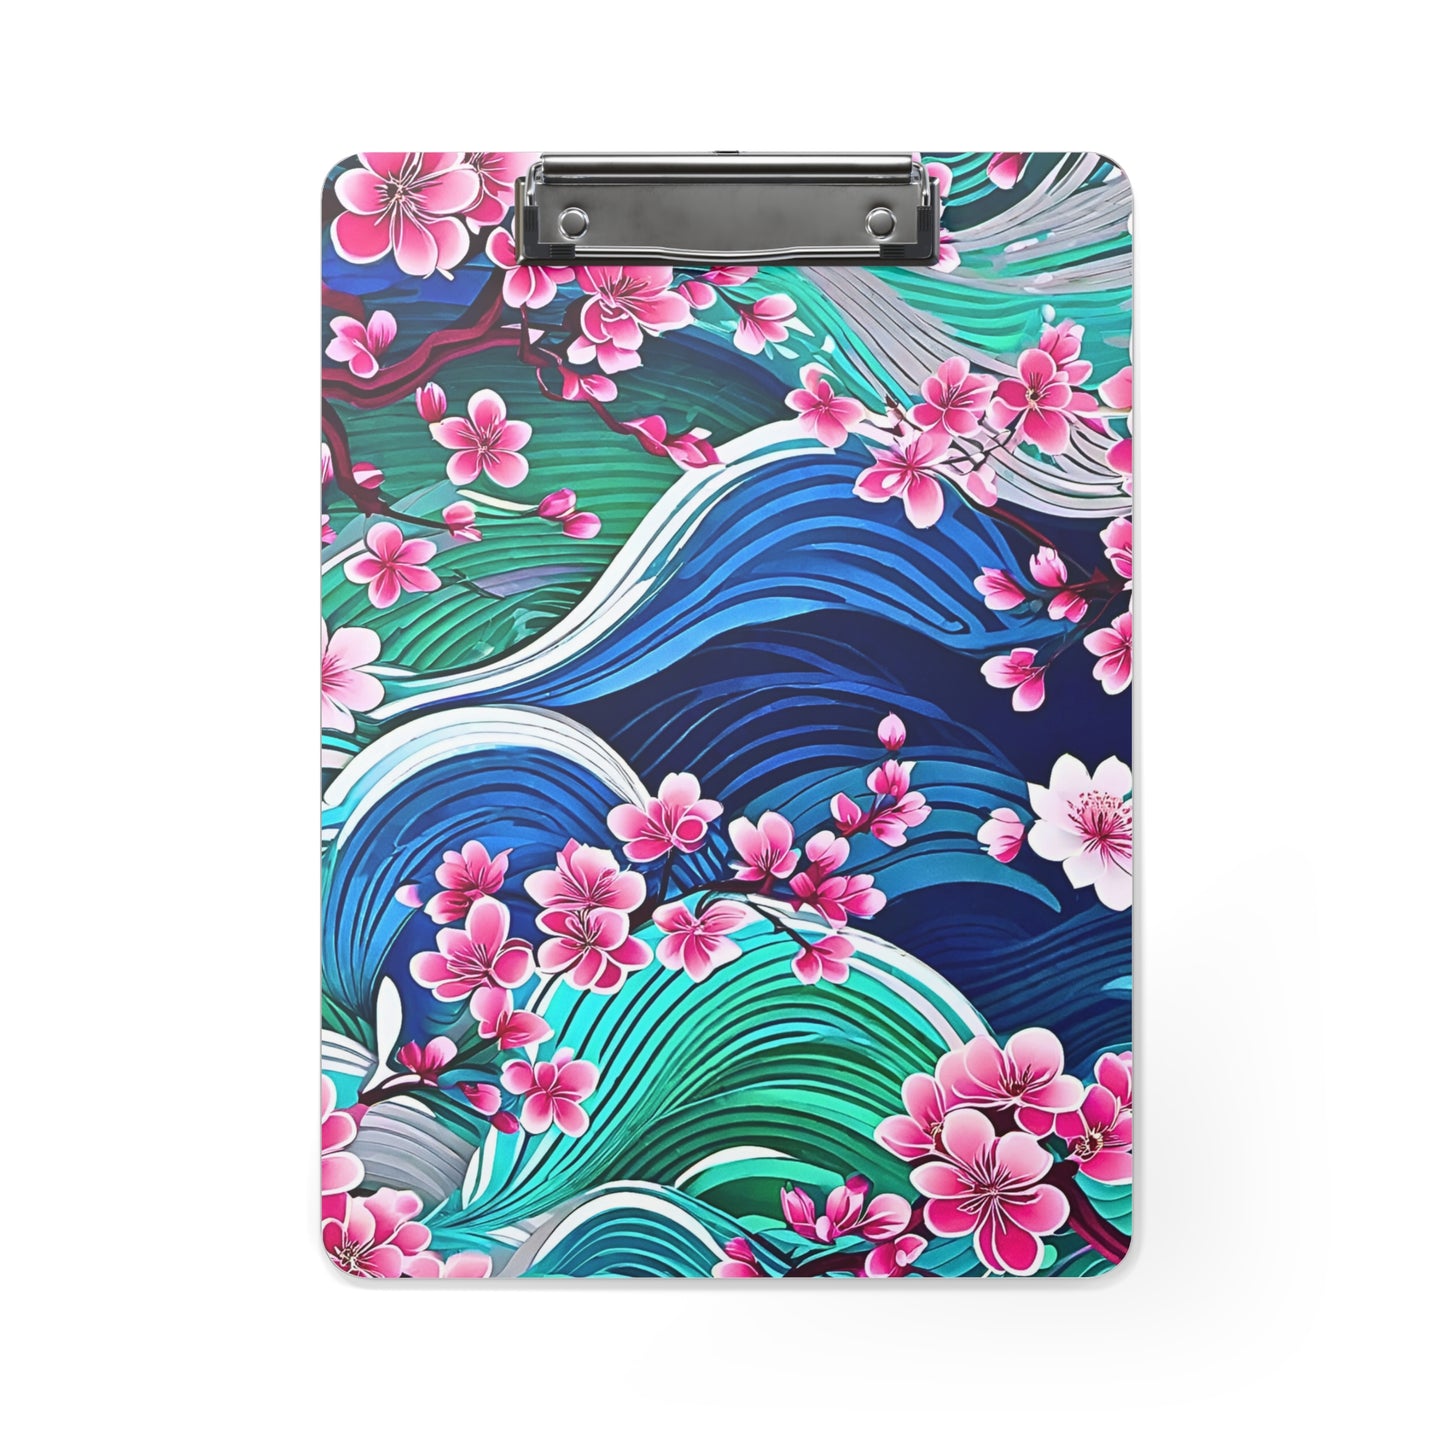 Japanese Mountains Cherry Blossoms Decorative Writing Desk Clipboard